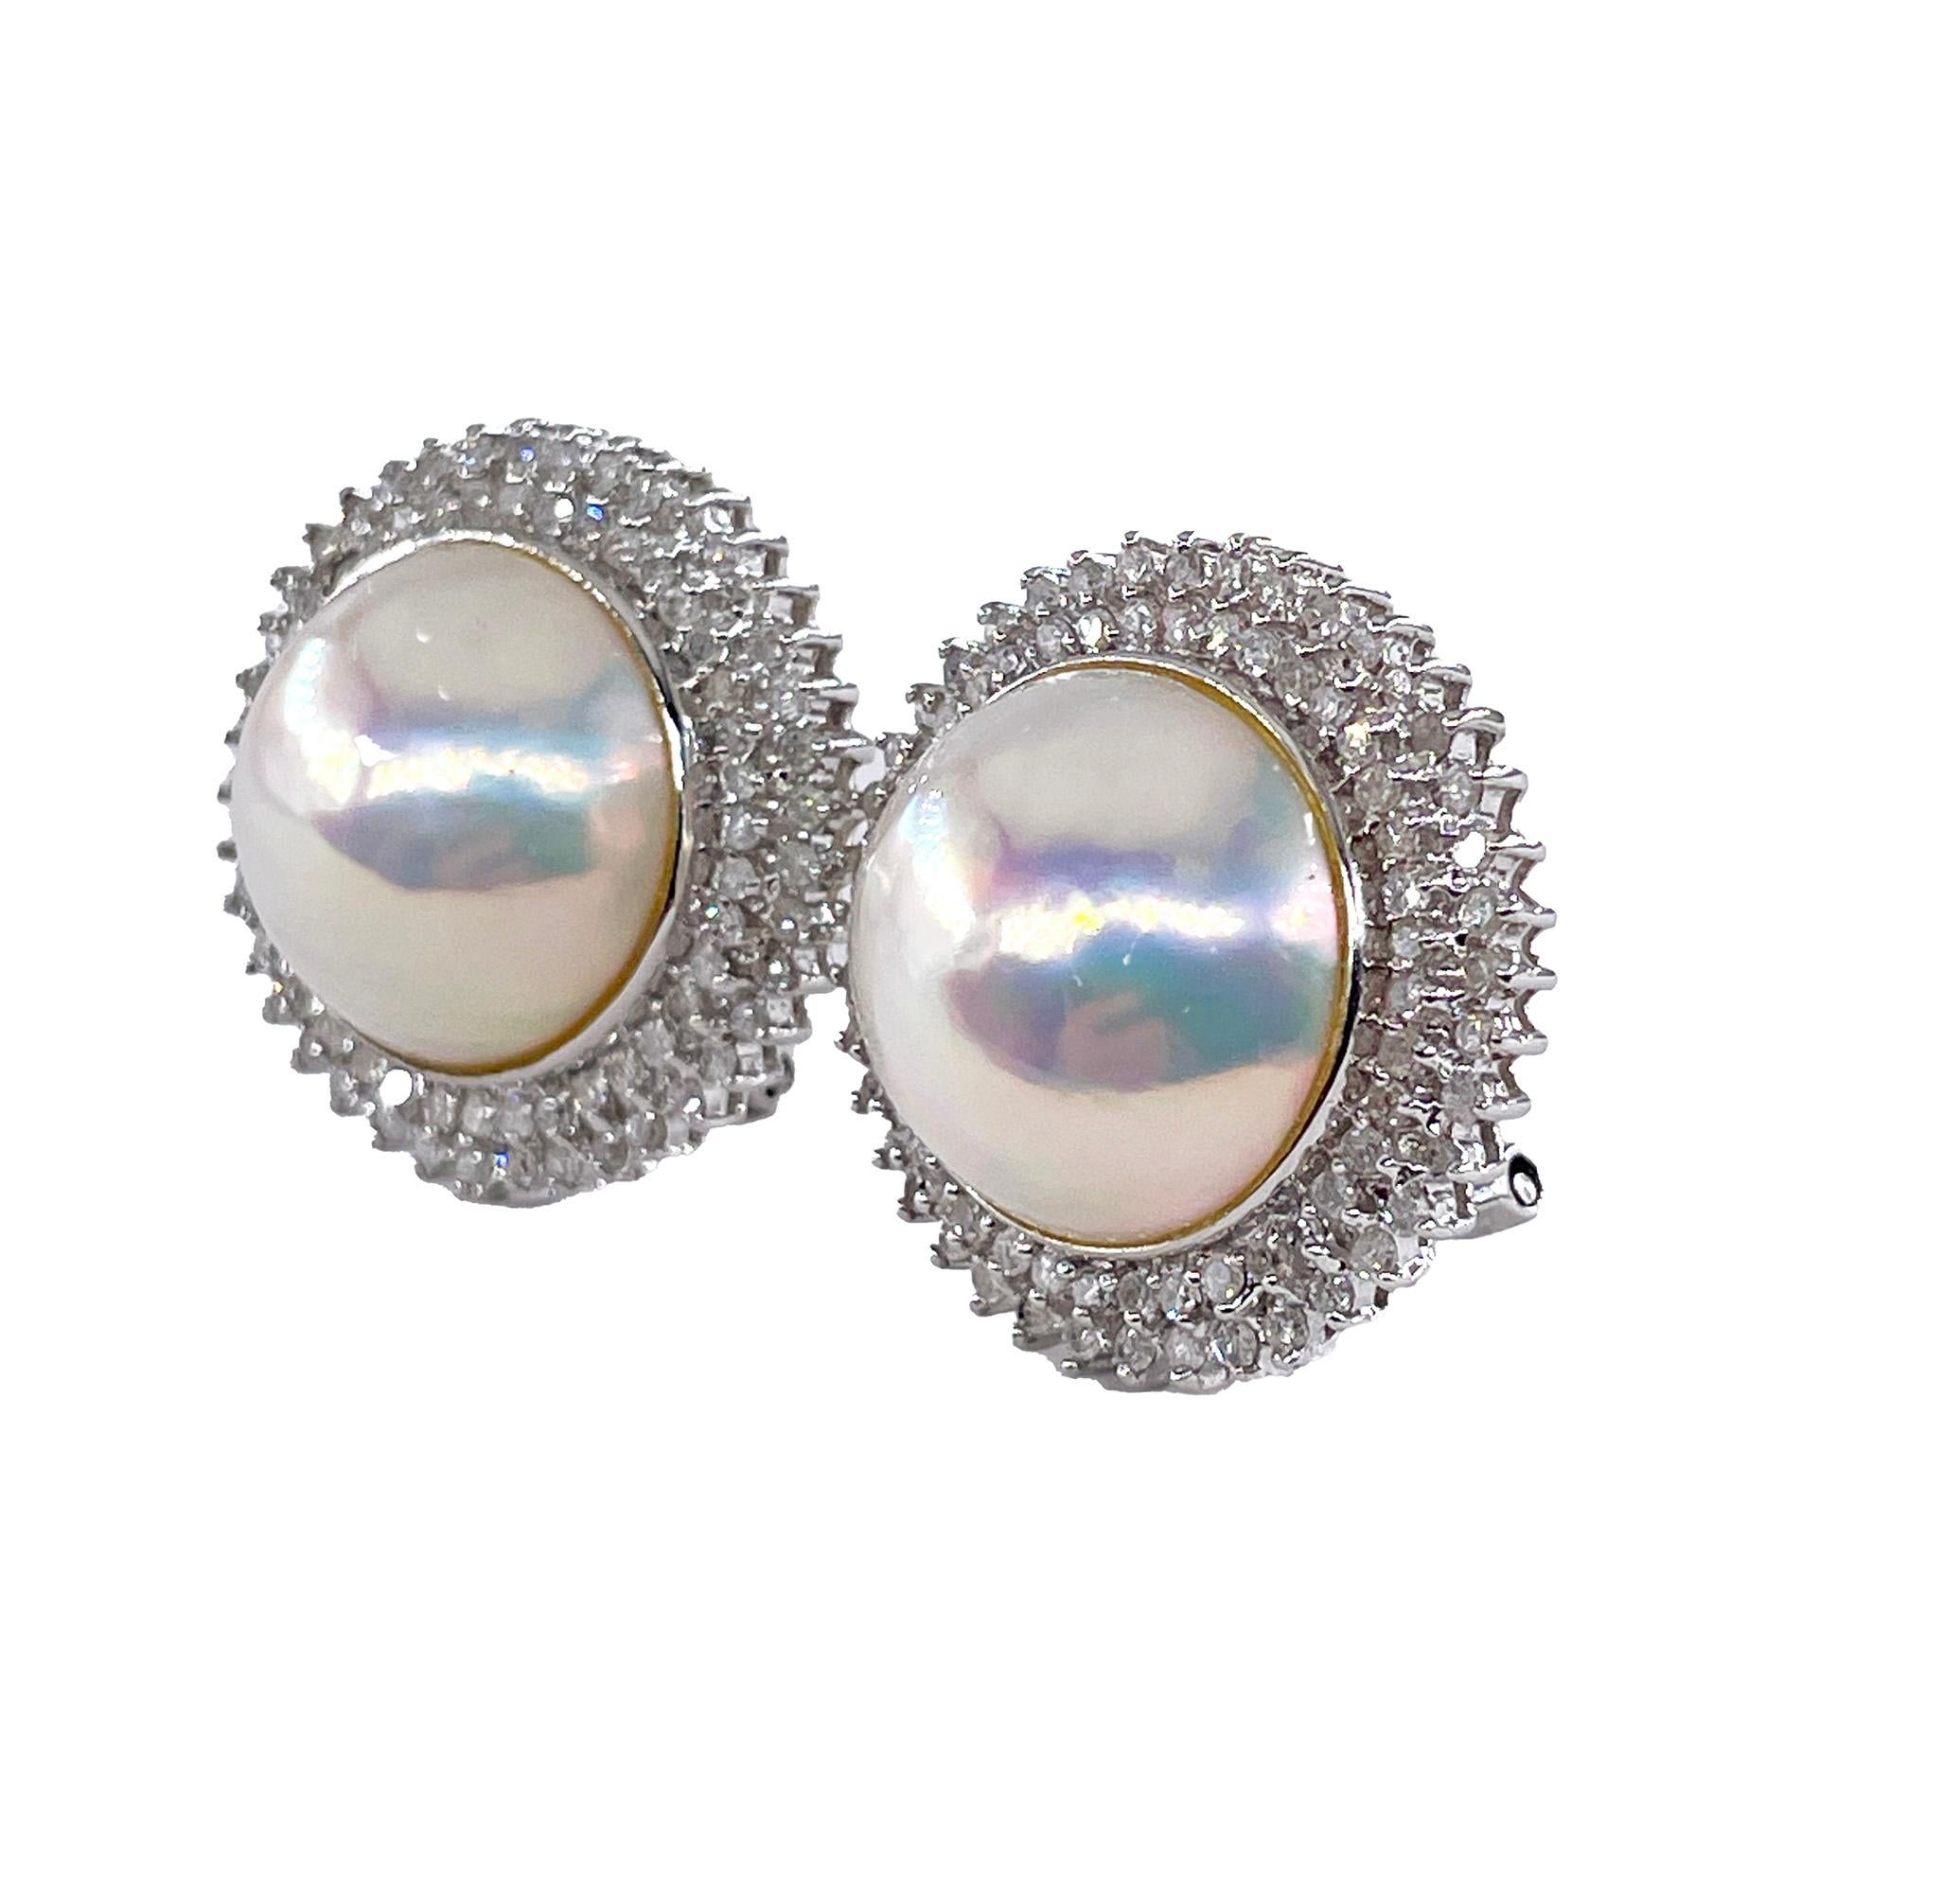 Cabochon Estate Vintage 14k White Gold Mabe Pearl 2.0ct Diamond Double Halo Earrings